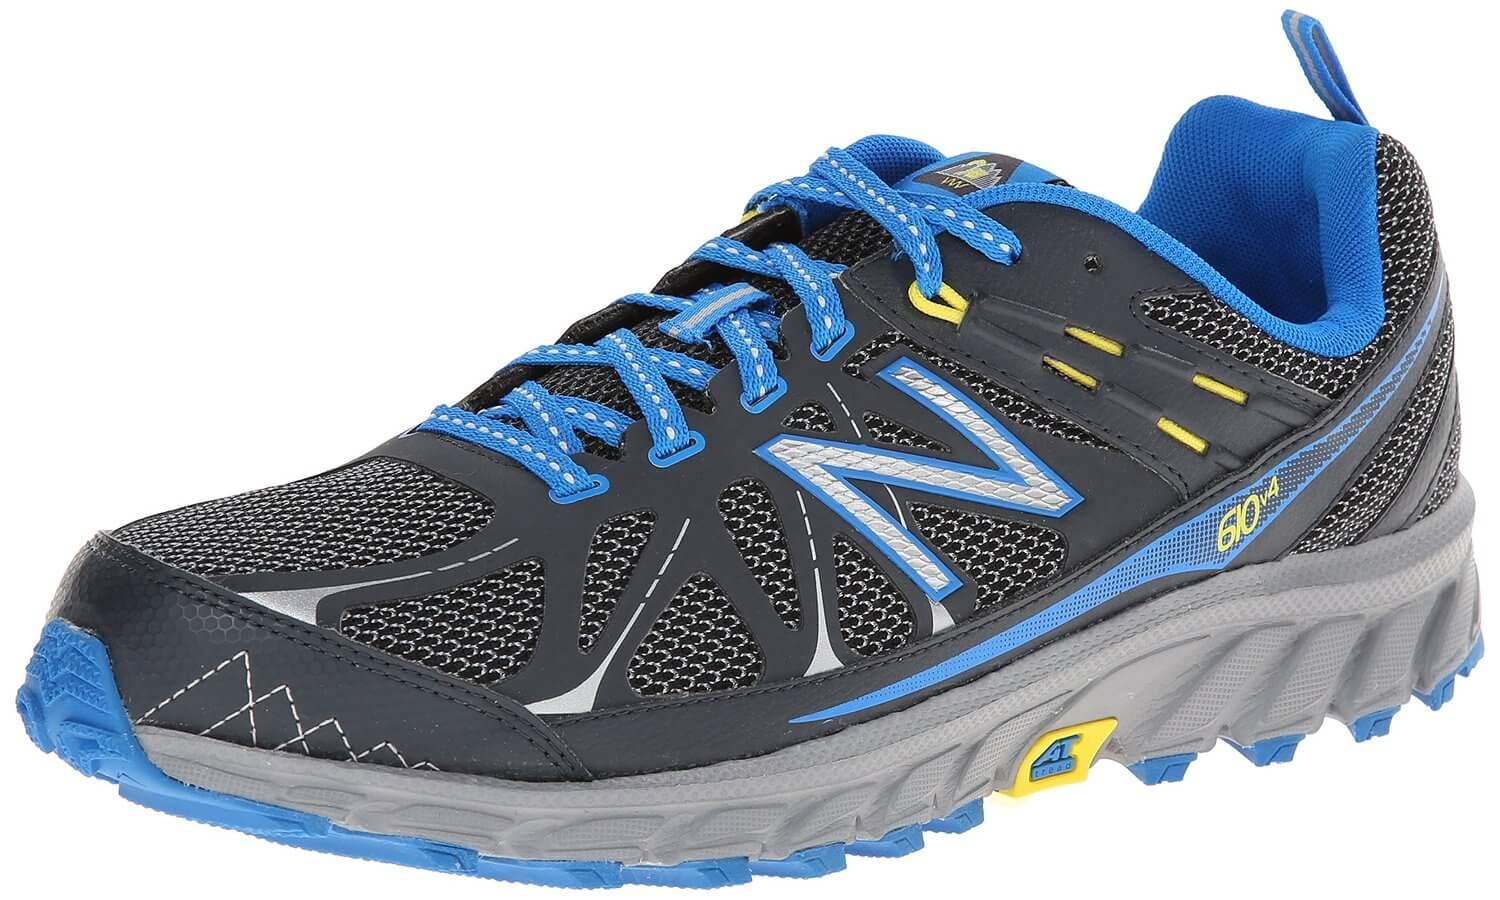 the New Balance 610 v4 is a versatile trainer that's great on a variety of terrains